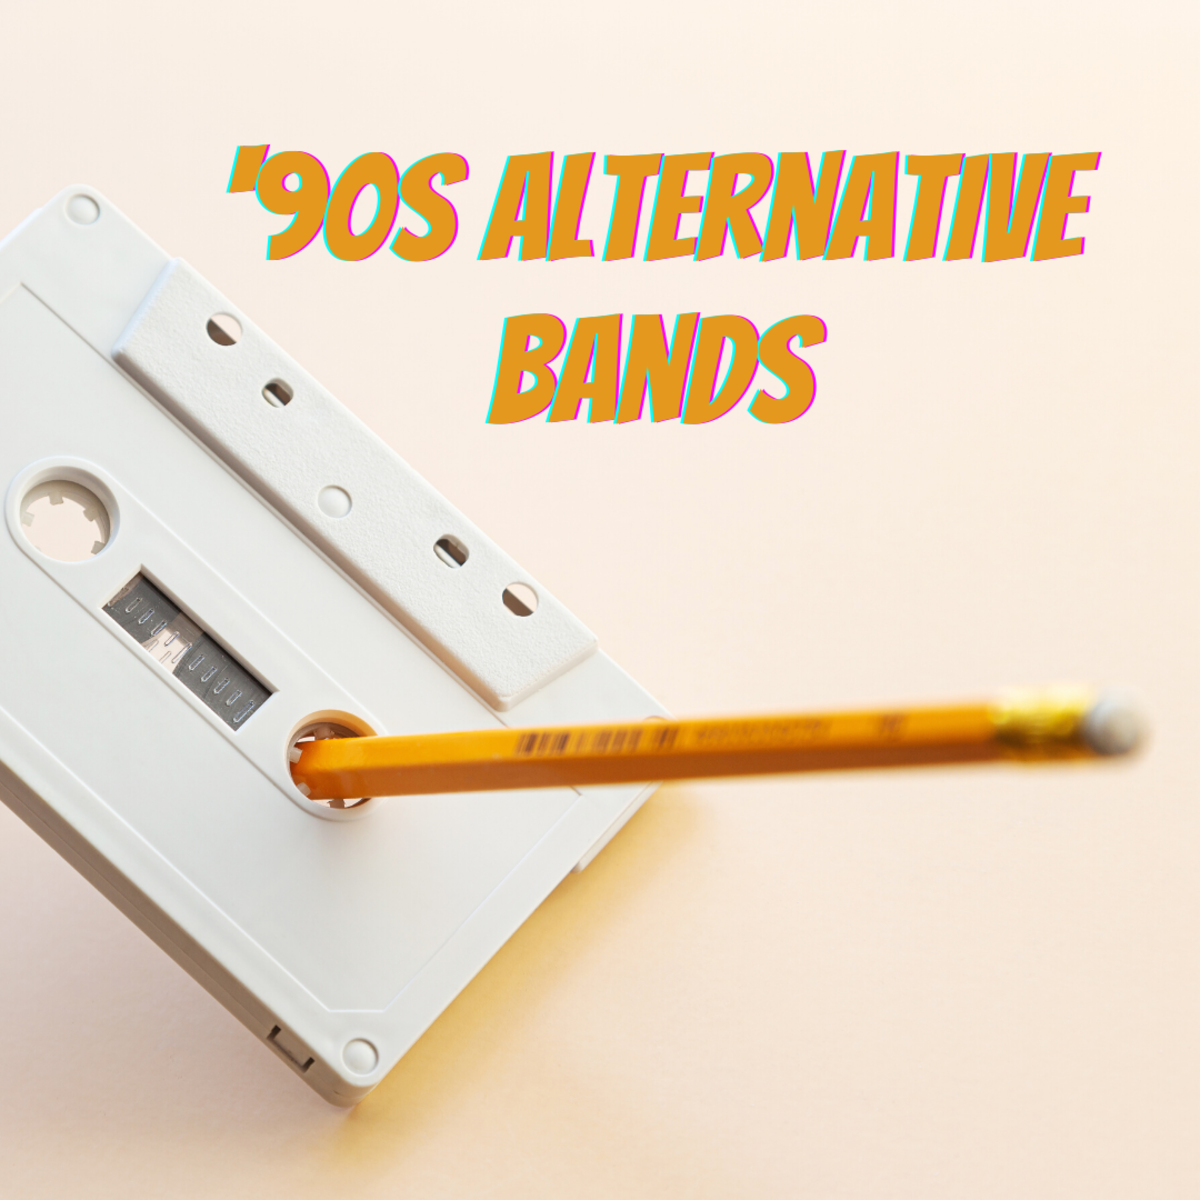 The best alternative bands of the '90s